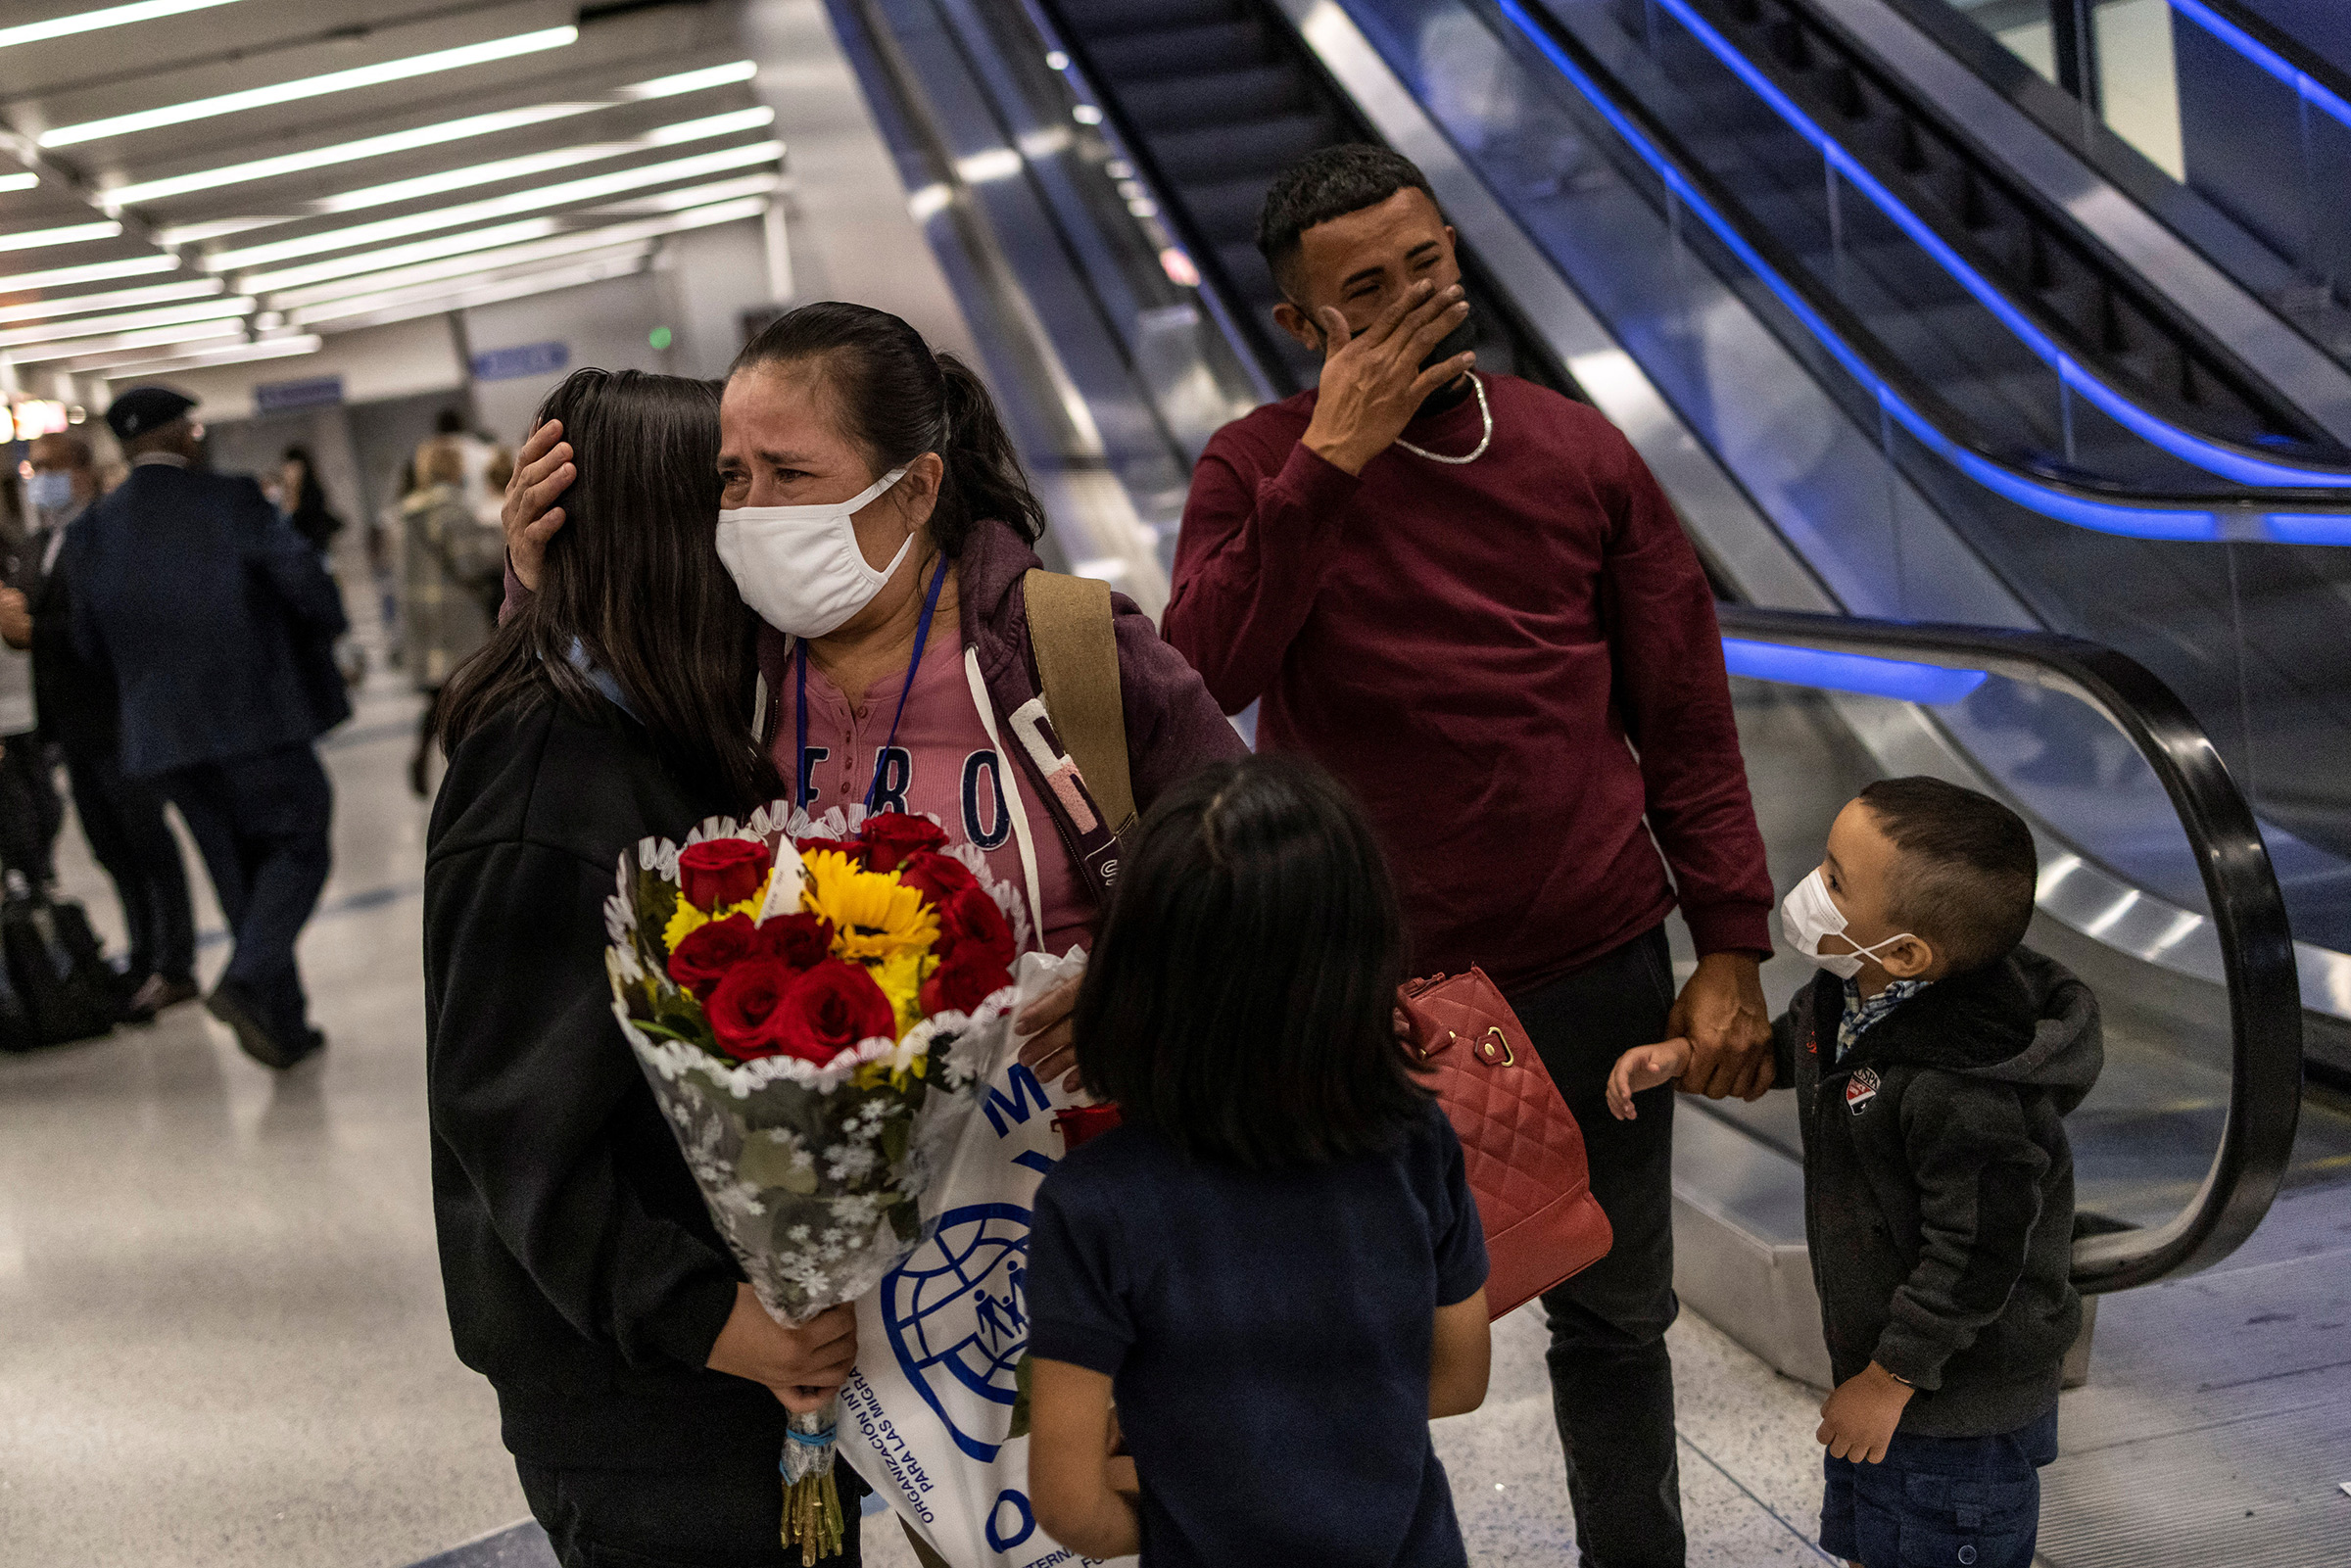 Maria Hernandez hugs her daughter Michelle, 12, (who is being referred to by her middle name to protect her privacy) during their family reunification at the Los Angeles International Airport on January 11, 2022. Hernandez was separated from her daughters and deported to Honduras under the Trump Administration's Zero Tolerance policy in 2017. (Carlos Barria—Reuters)